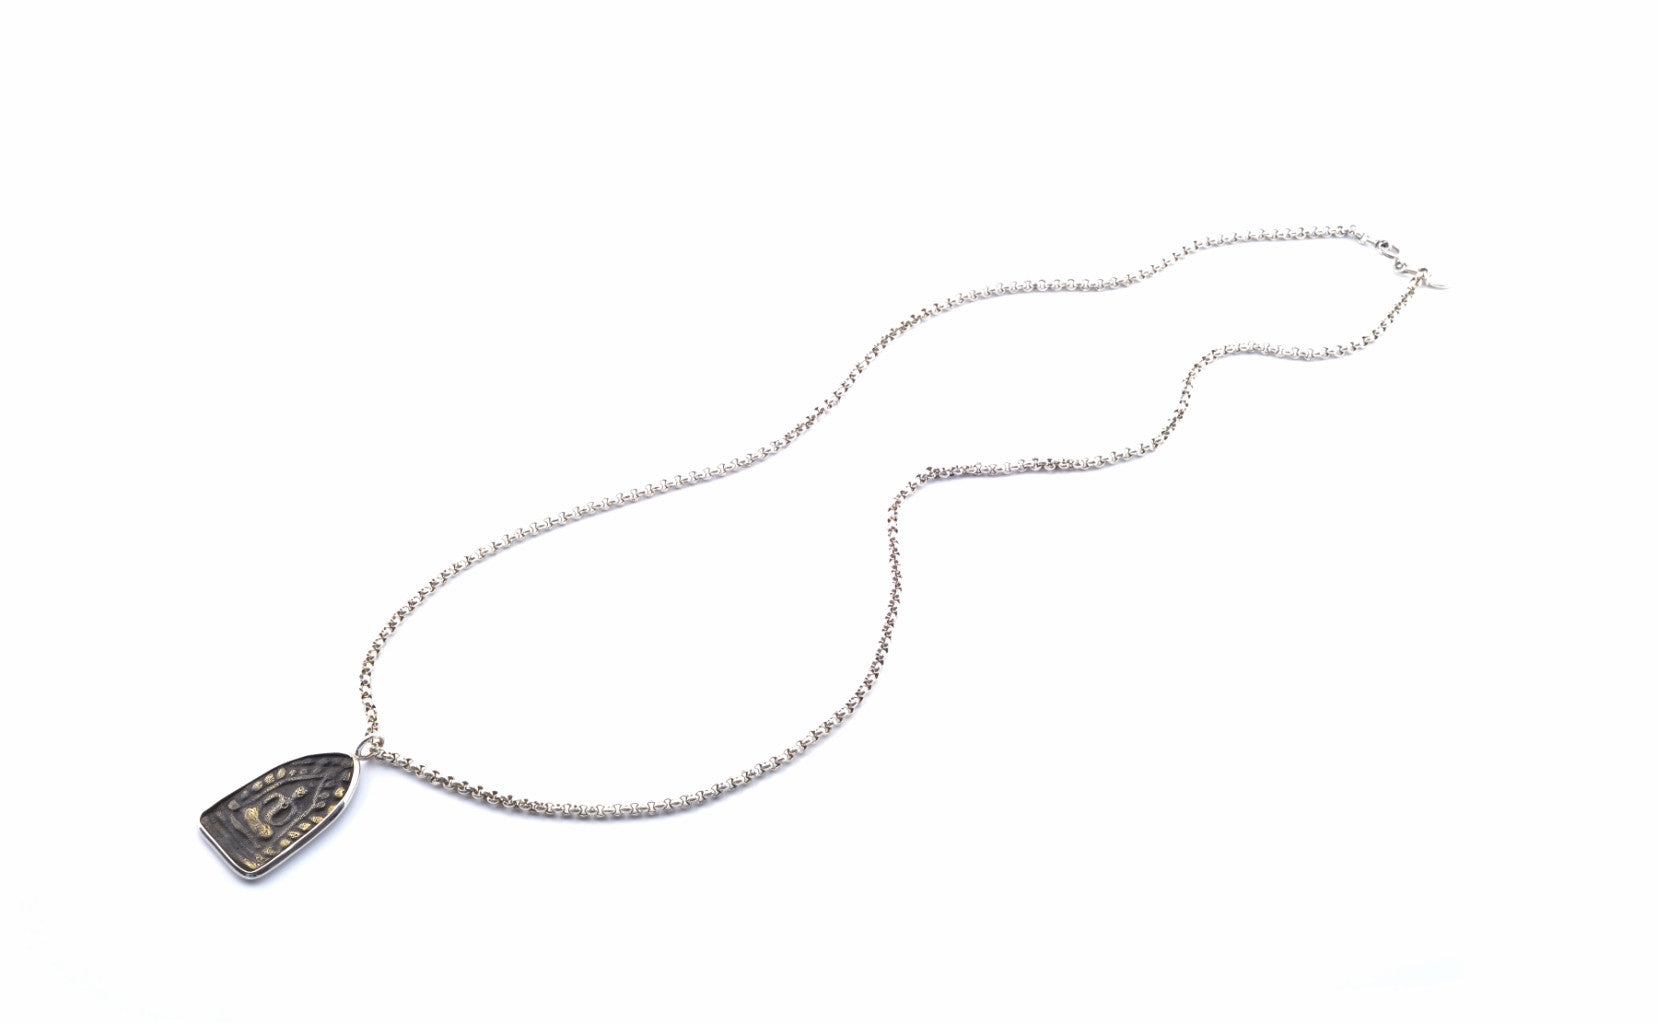 Dog Tag Necklace in Oxidized Sterling Silver